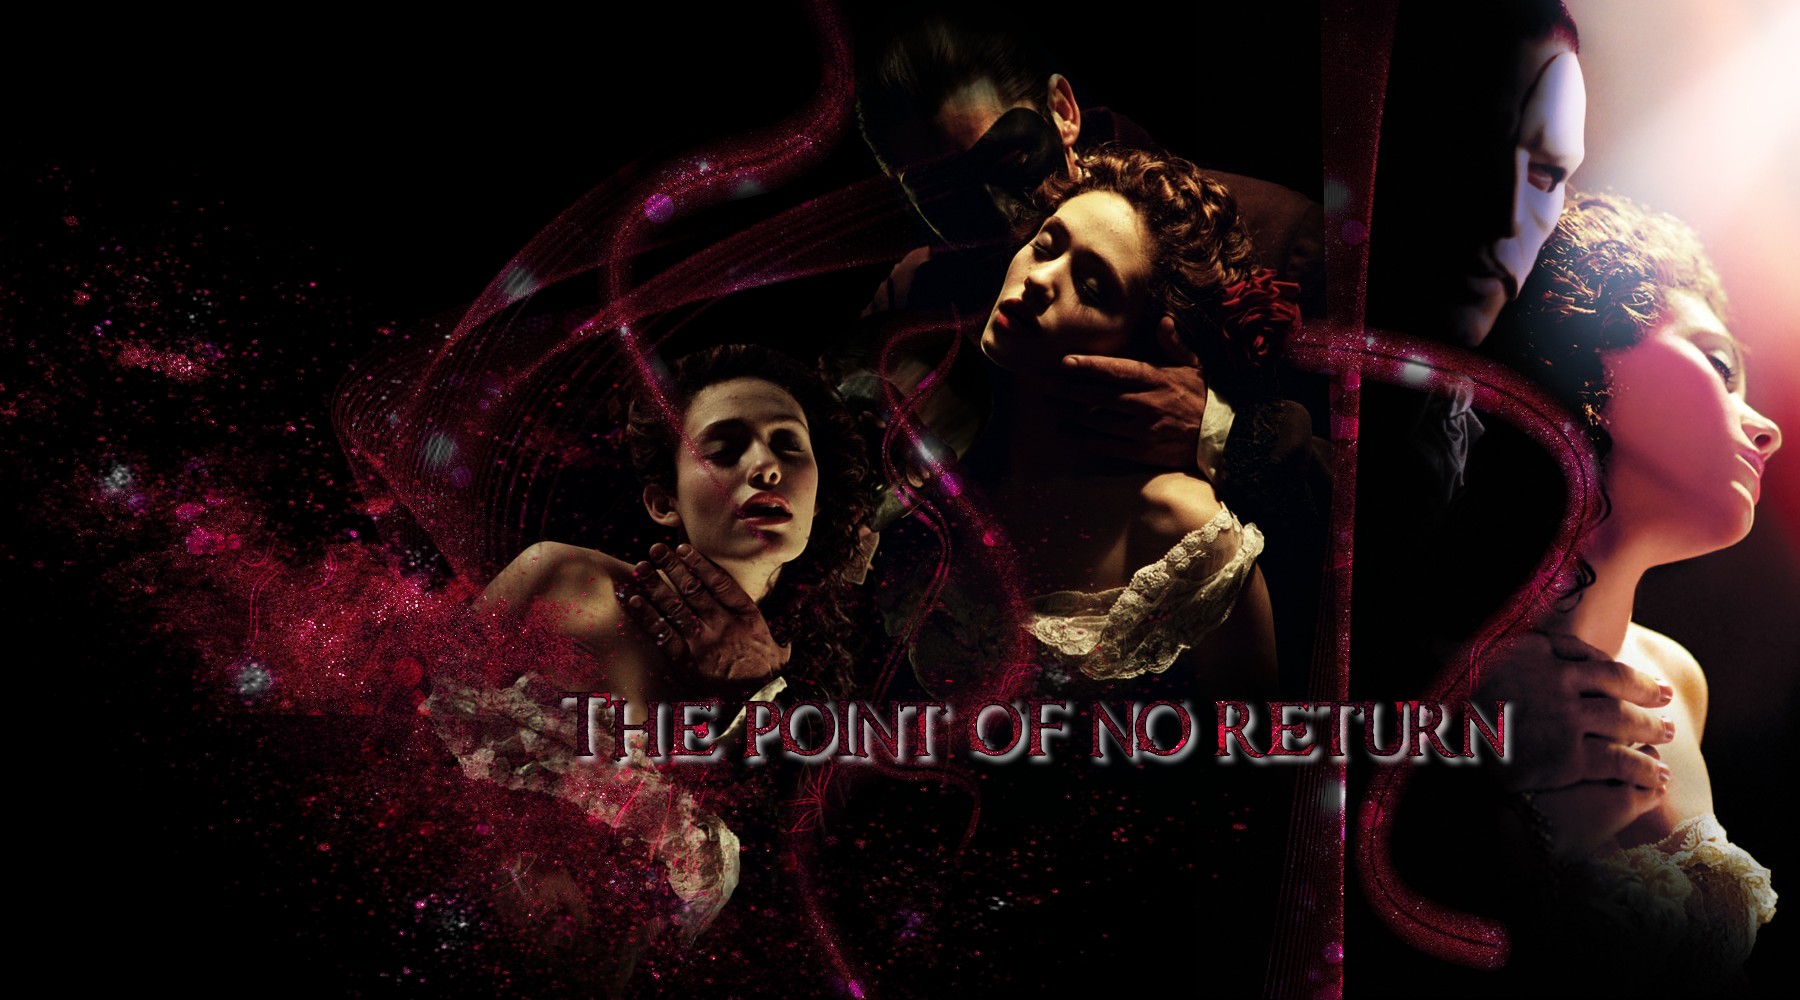 Free download Phantom of the opera wallpaper by KatherinS [1800x1000